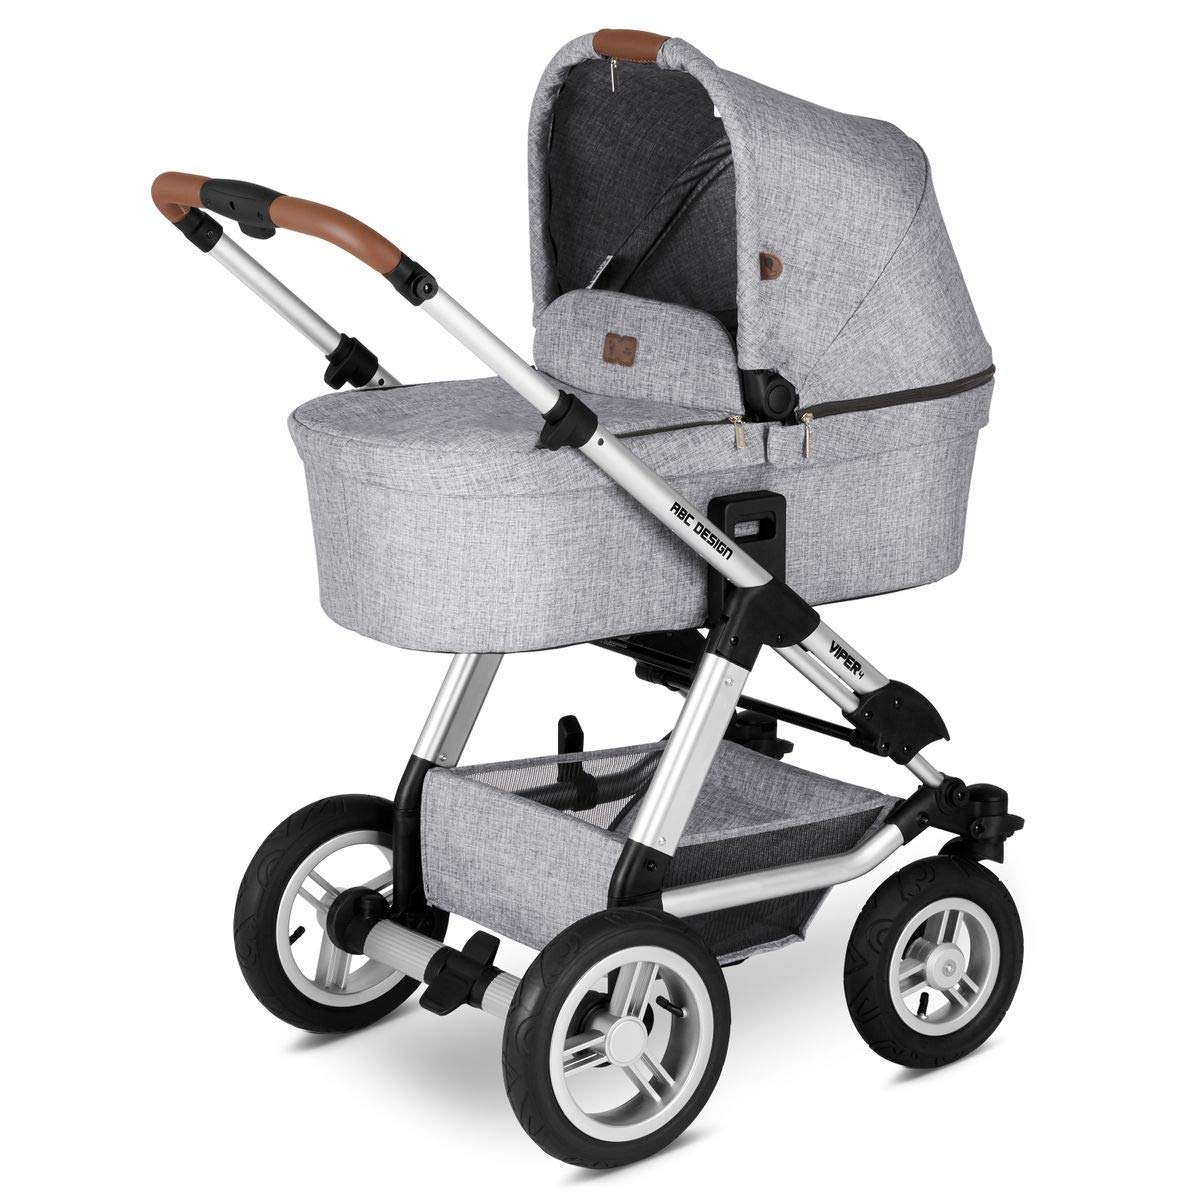 ABC Design Viper 4 Pushchair for Newborns & Babies up to 22 kg – Off-Road – Wheel Suspension & Pneumatic Wheels – Height Adjustable Pusher – Colour: Graphite Grey